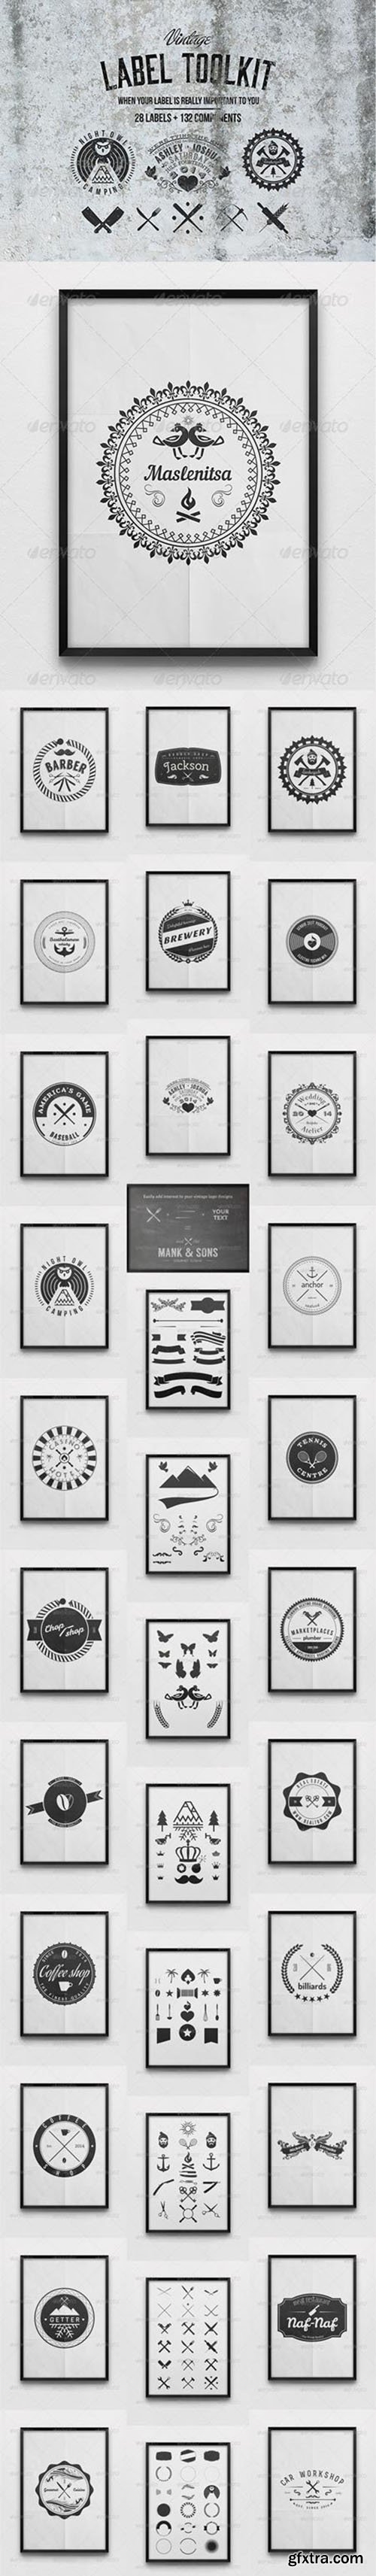 Graphicriver - Vintage label toolkit 8050501